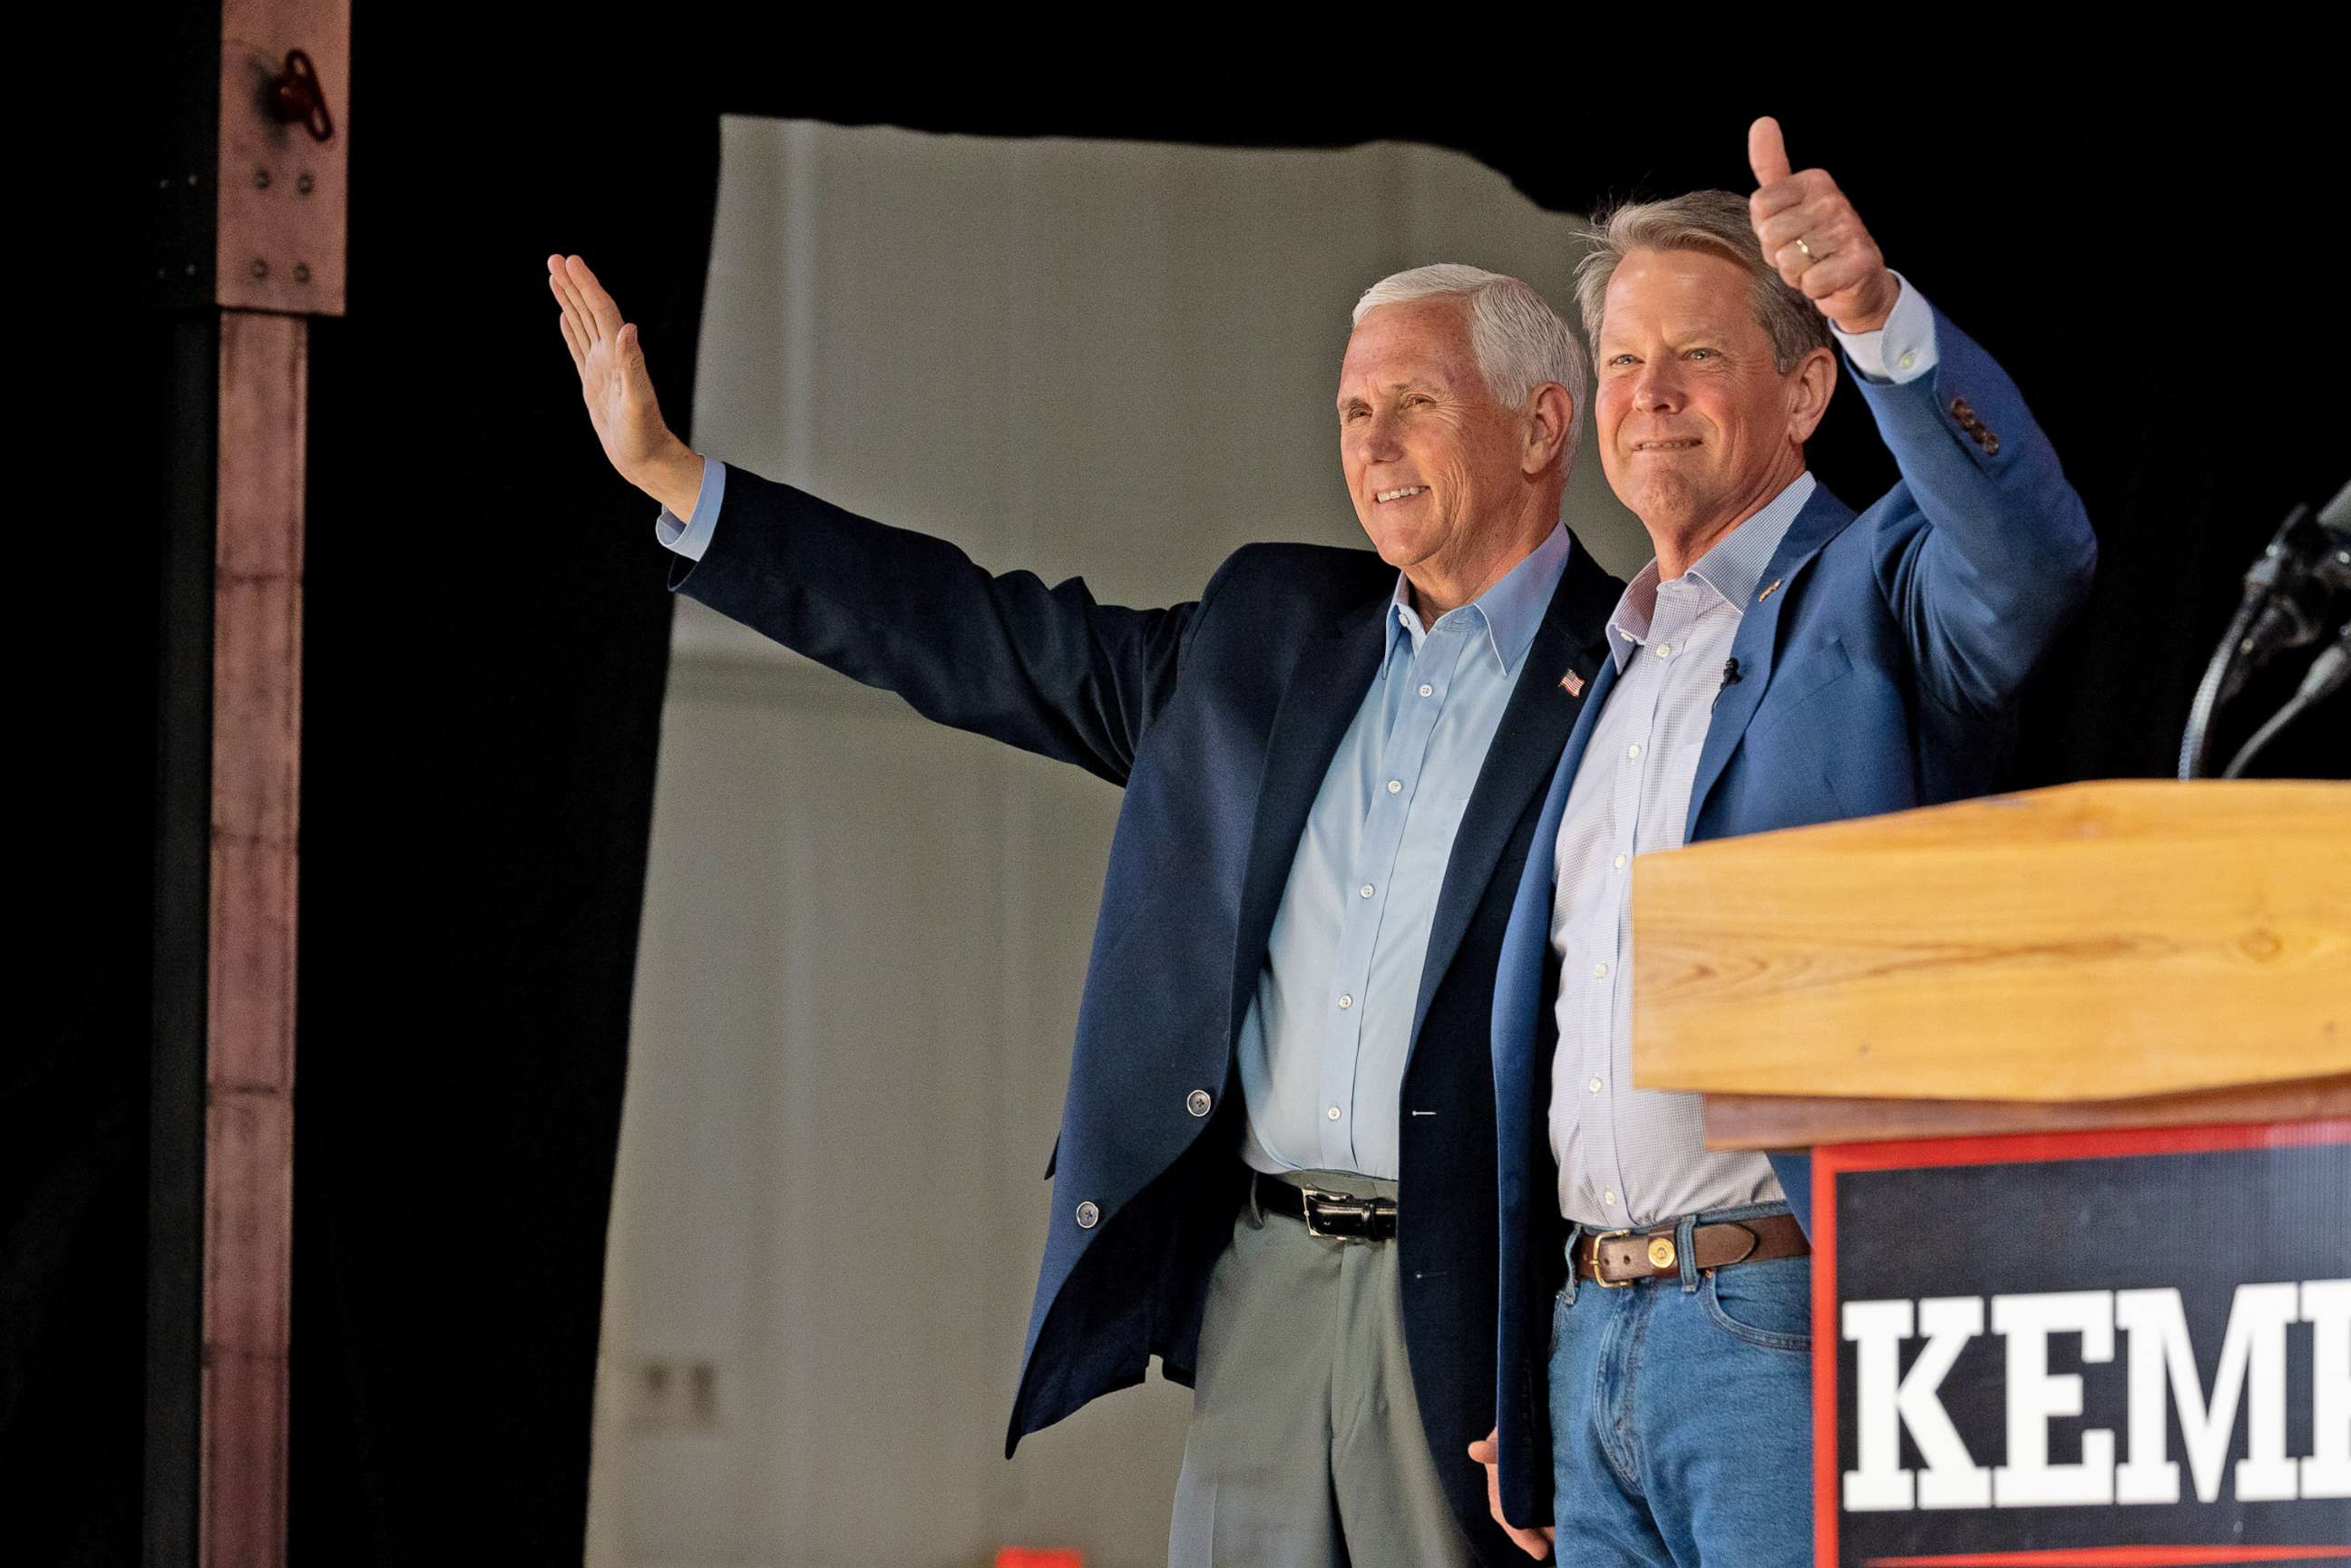 PHOTO: Governor Brian Kemp is seen at a campaign rally with Former Vice President Mike Pence on May 23, 2022 in Kennesaw, Ga.